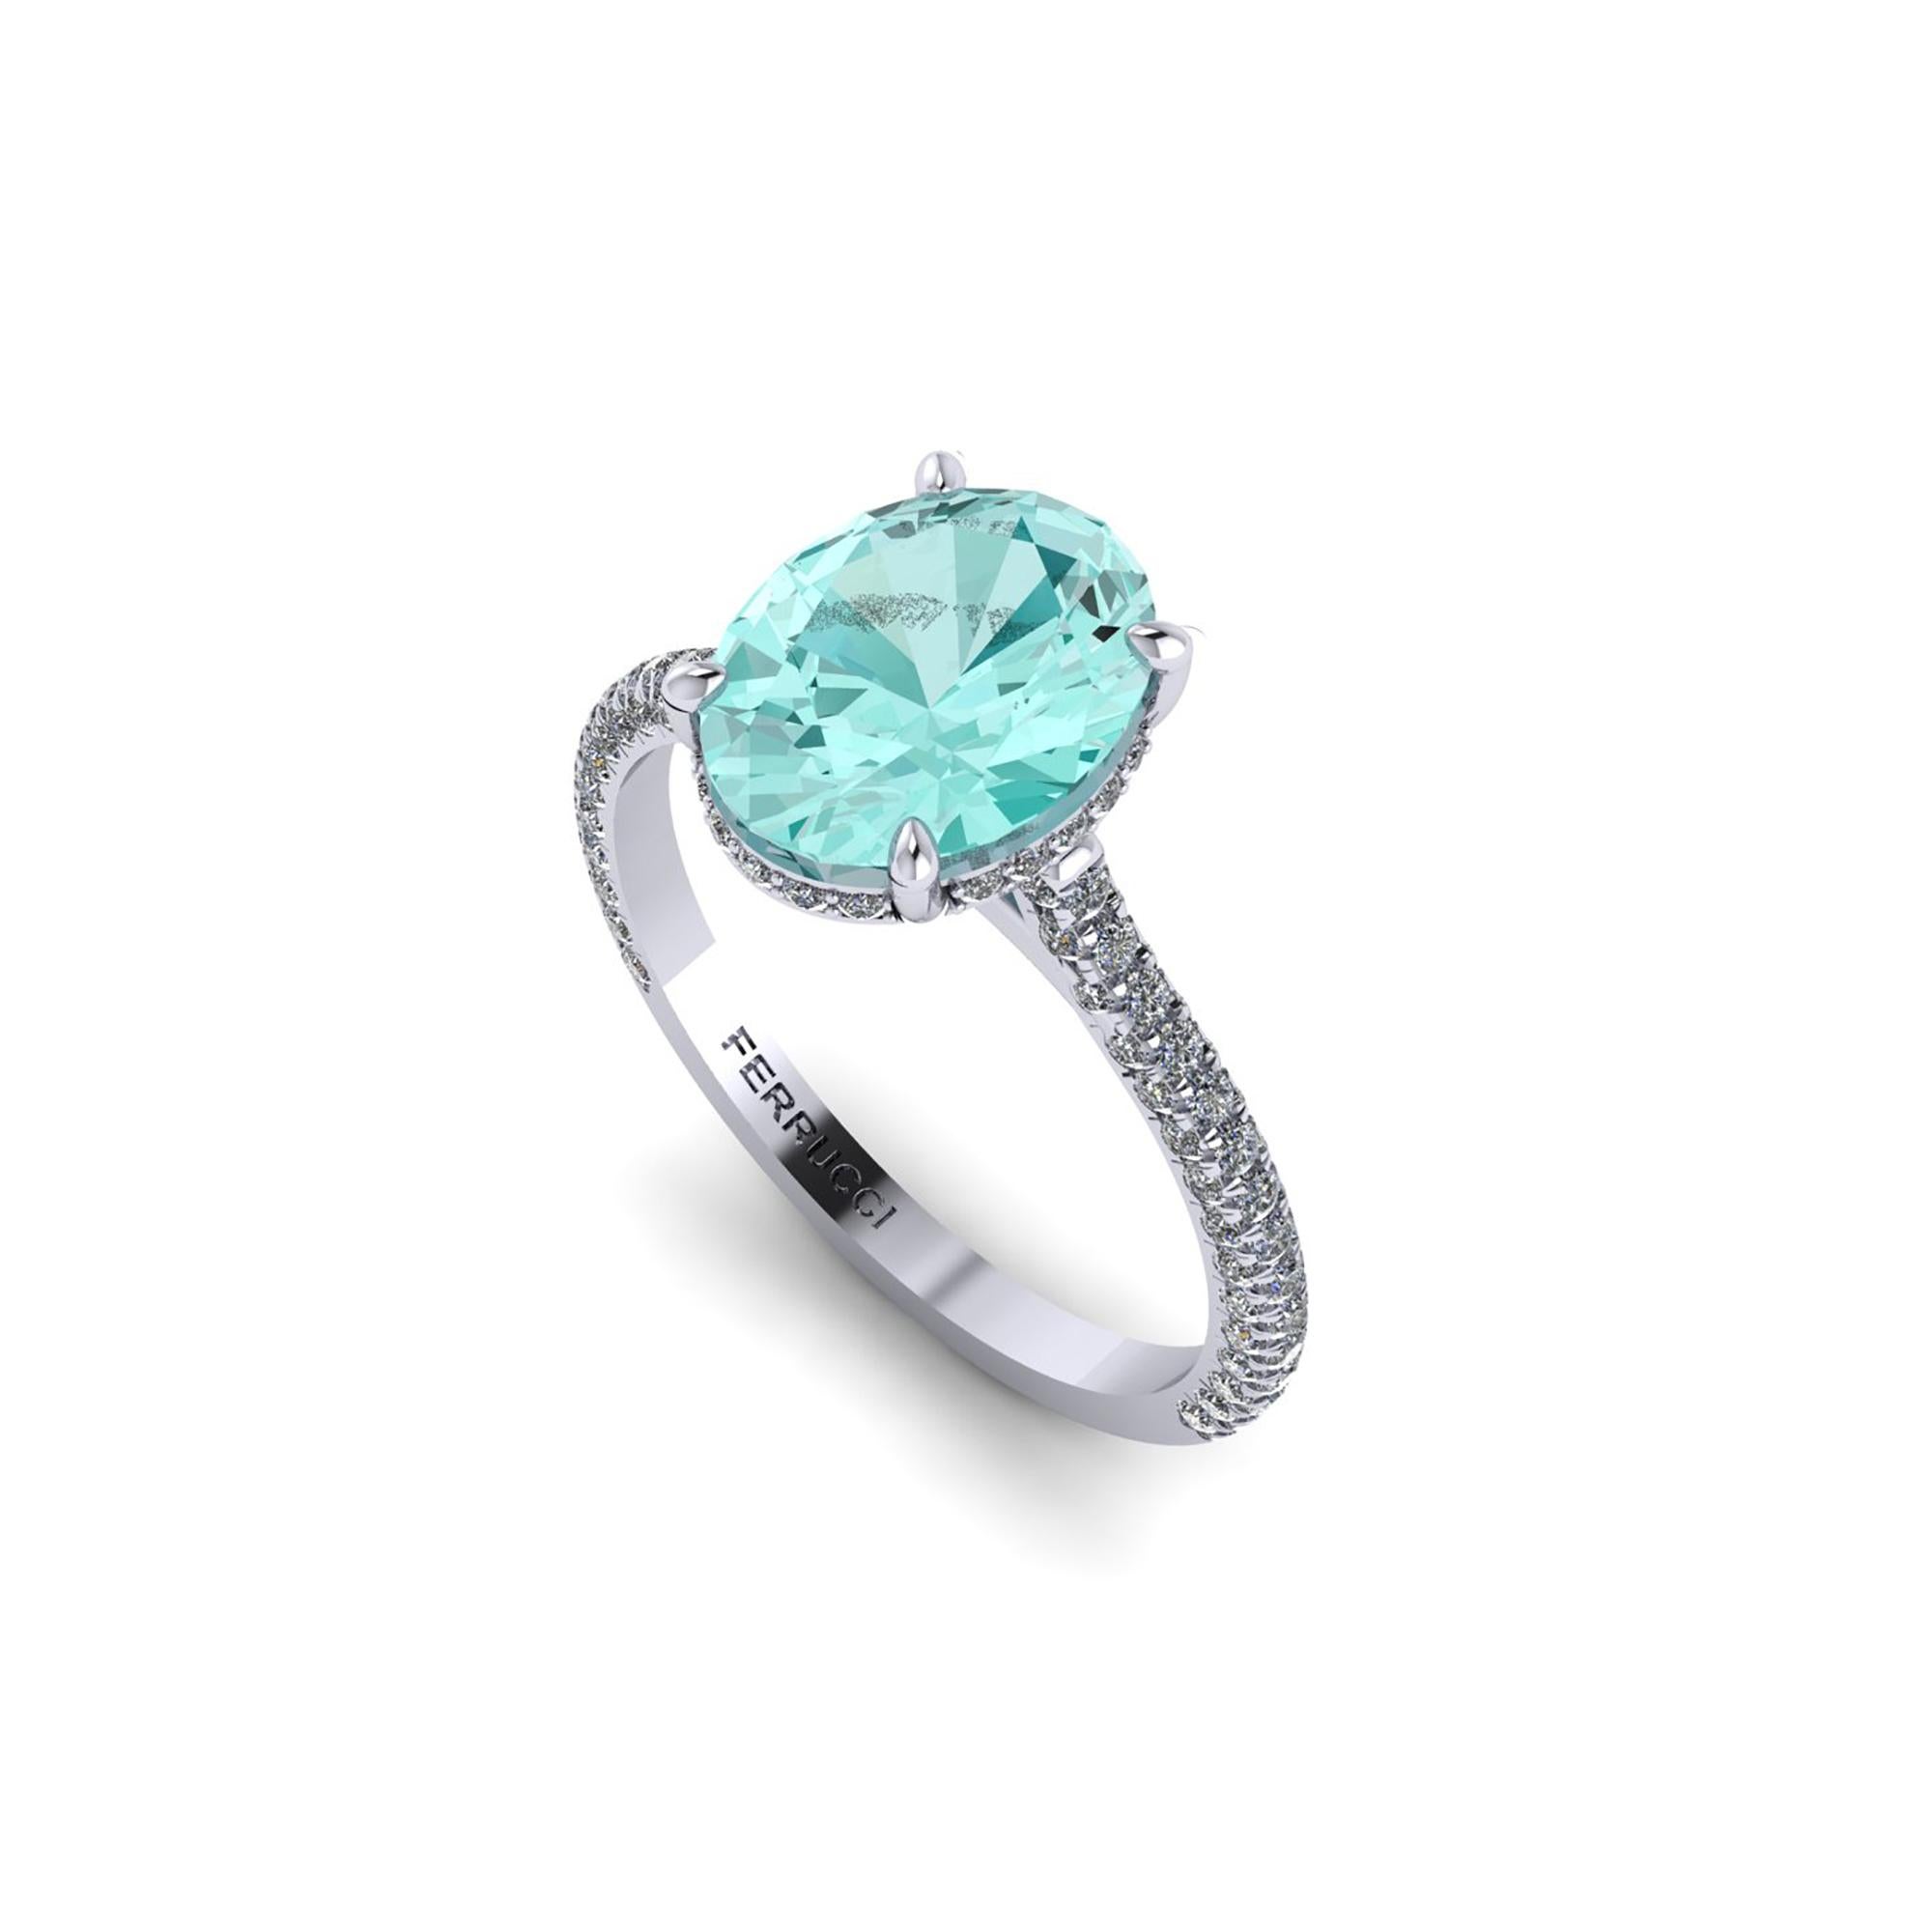 AGL Certified 2.11 carat Paraiba tourmaline, hand cut in Oval cut shape, a rare gem, conveiced in an hand made Platinum ring,
adorned with a shower of ultra white diamonds, hand set on almost every surface to give the maximum light reflection and